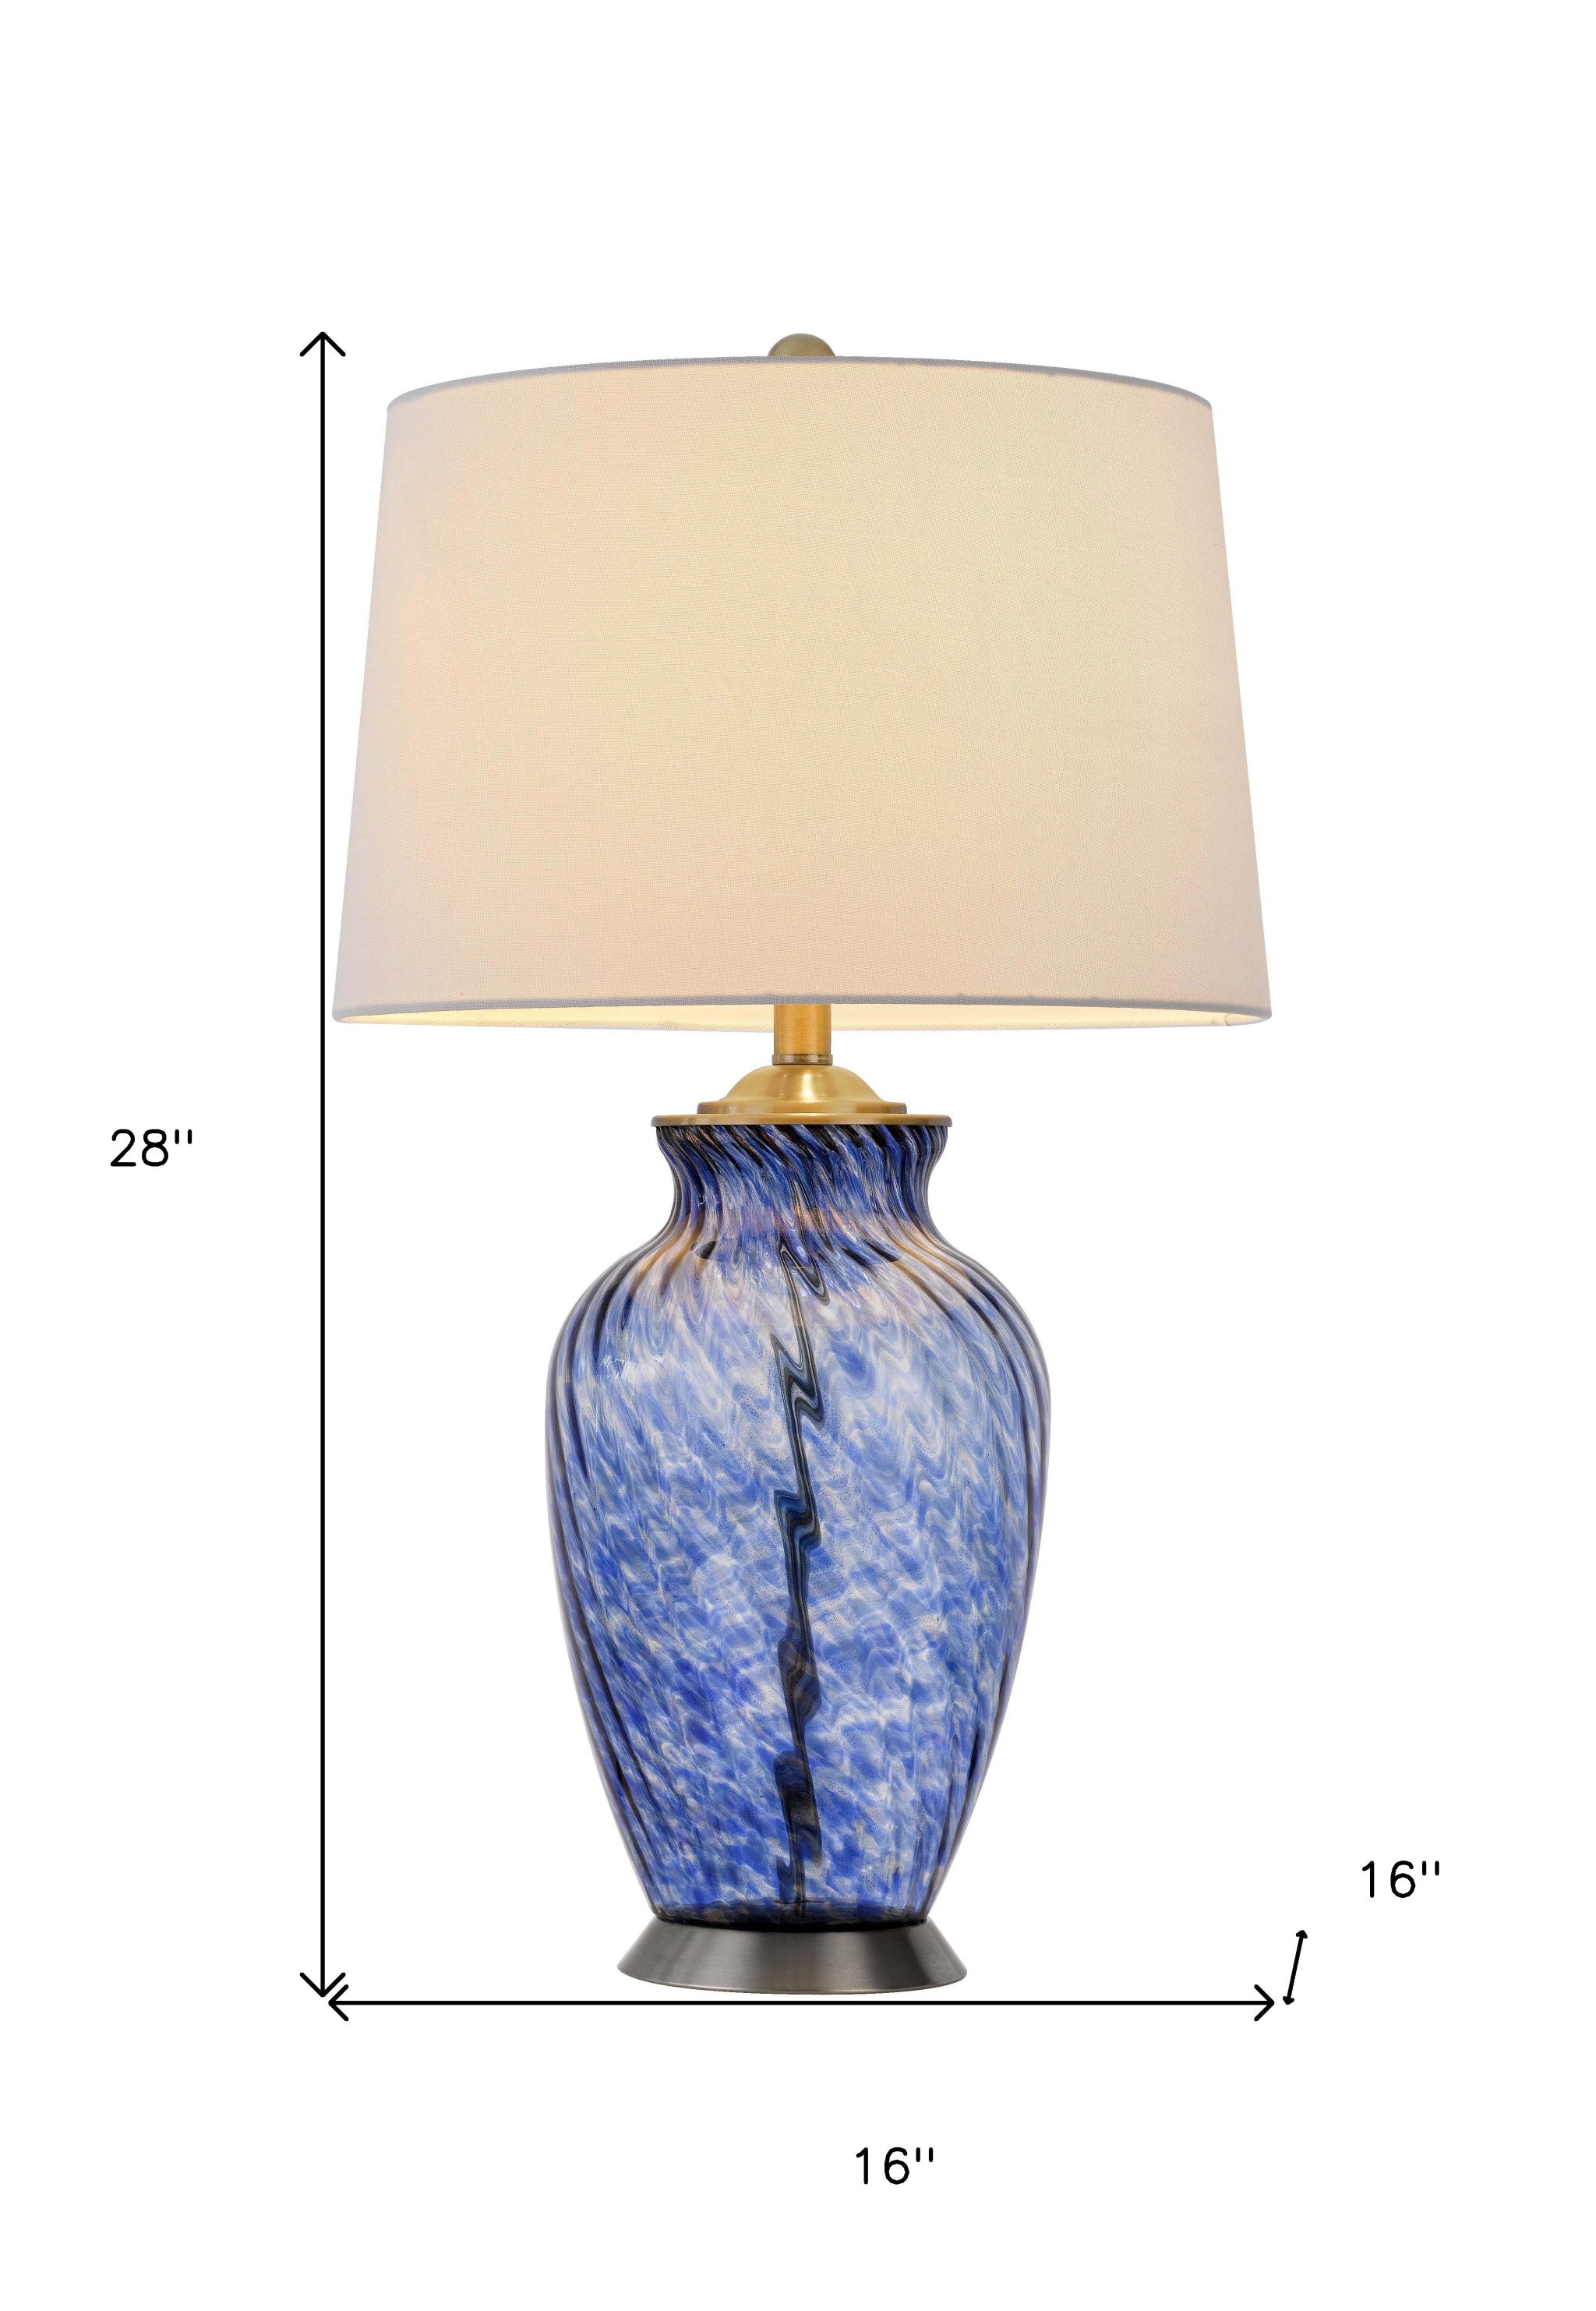 28" Blue Swirl Glass Table Lamp With White Empire Shade